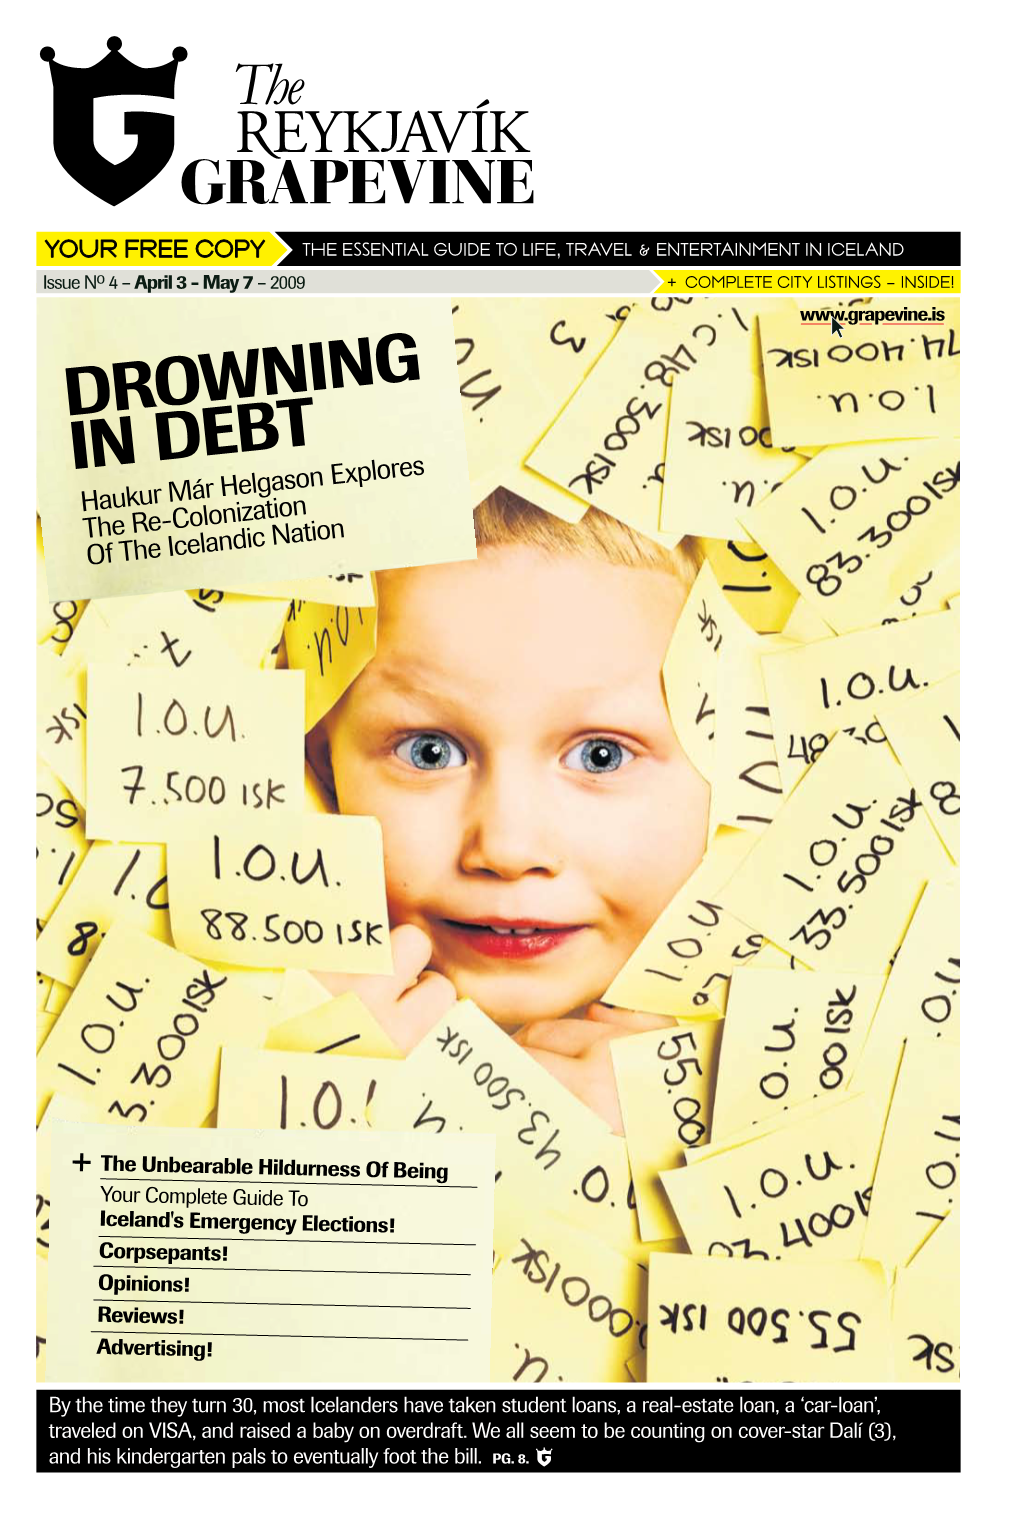 DROWNING in DEBT Haukur Már Helgason Explores the Re-Colonization of the Icelandic Nation